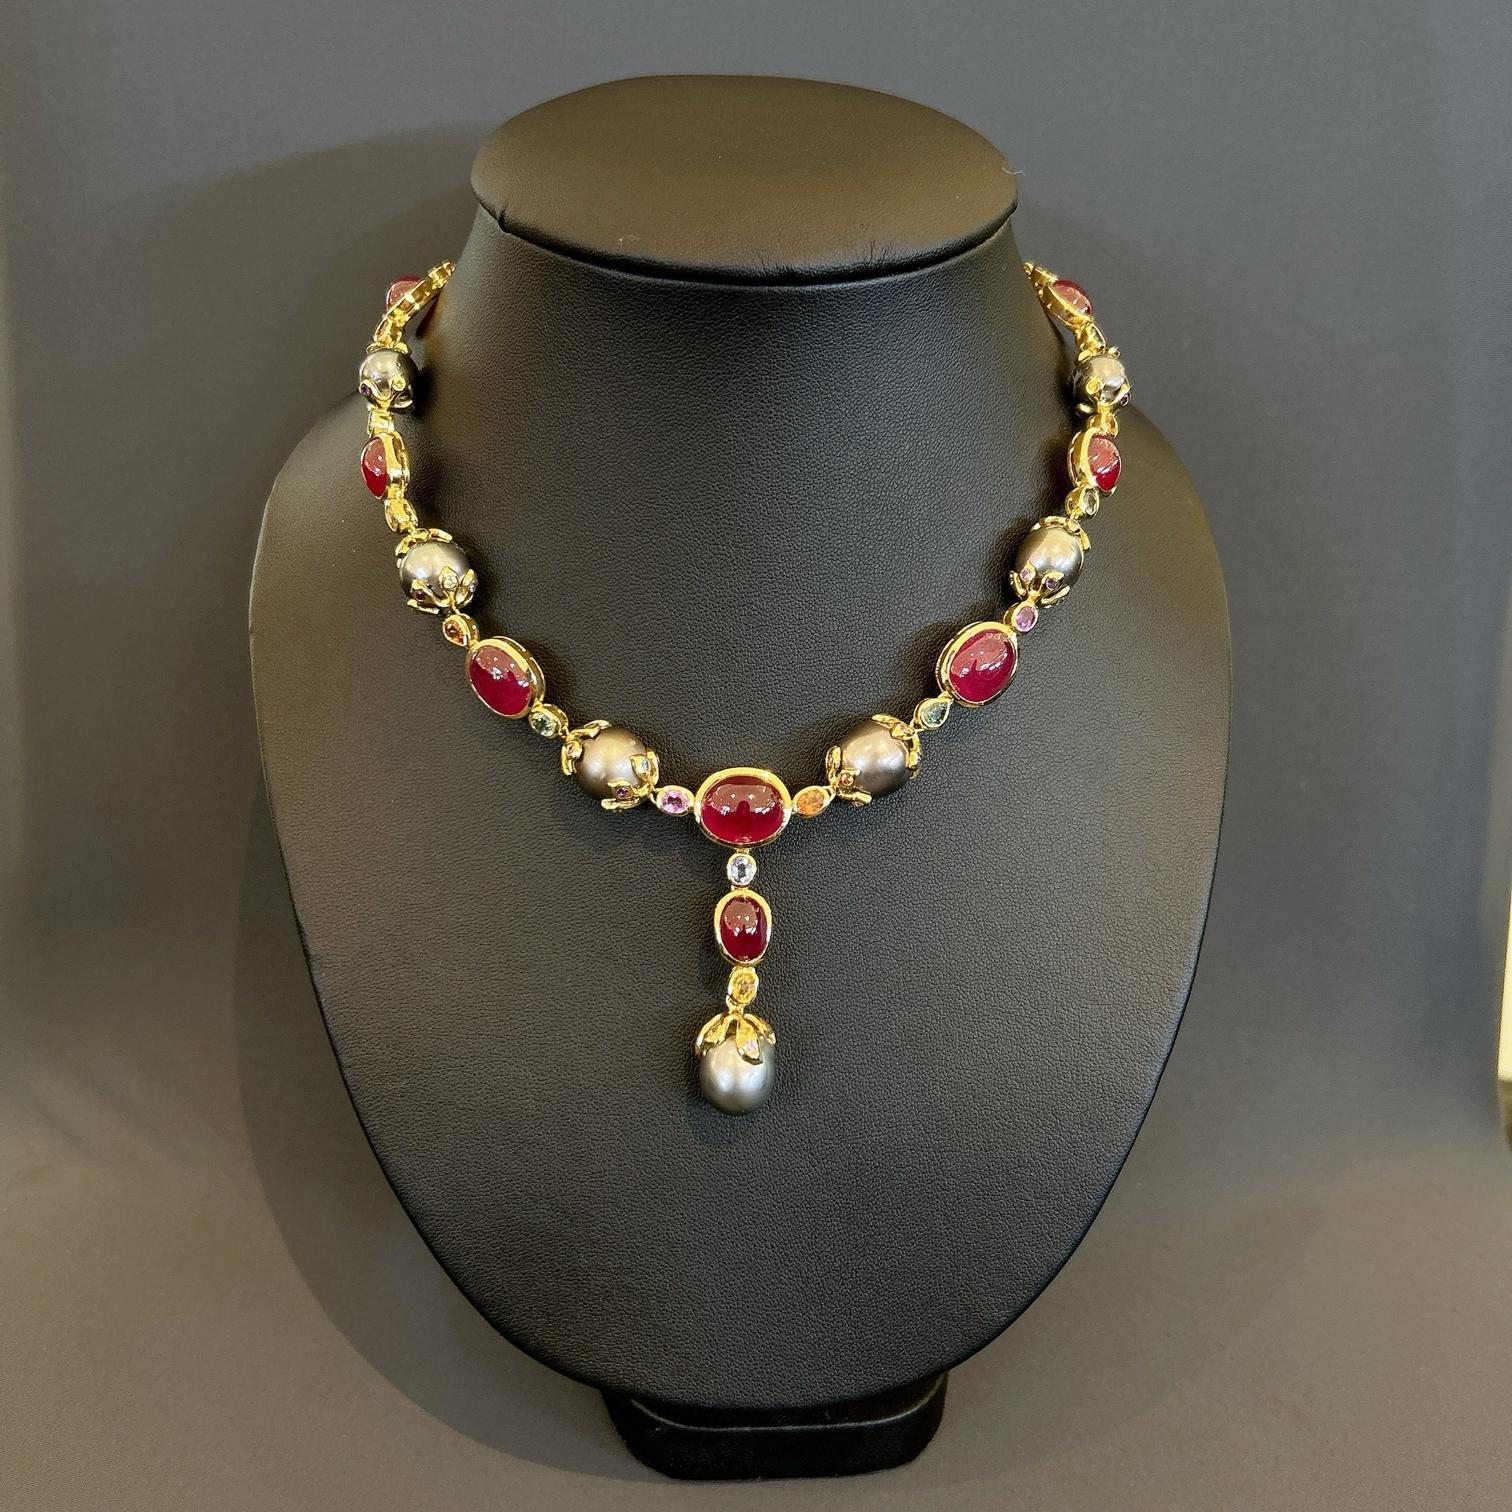 Women's Bochic “Baroque” Ruby, Pearl & Sapphire Necklace Set In 18K Gold & Silver For Sale